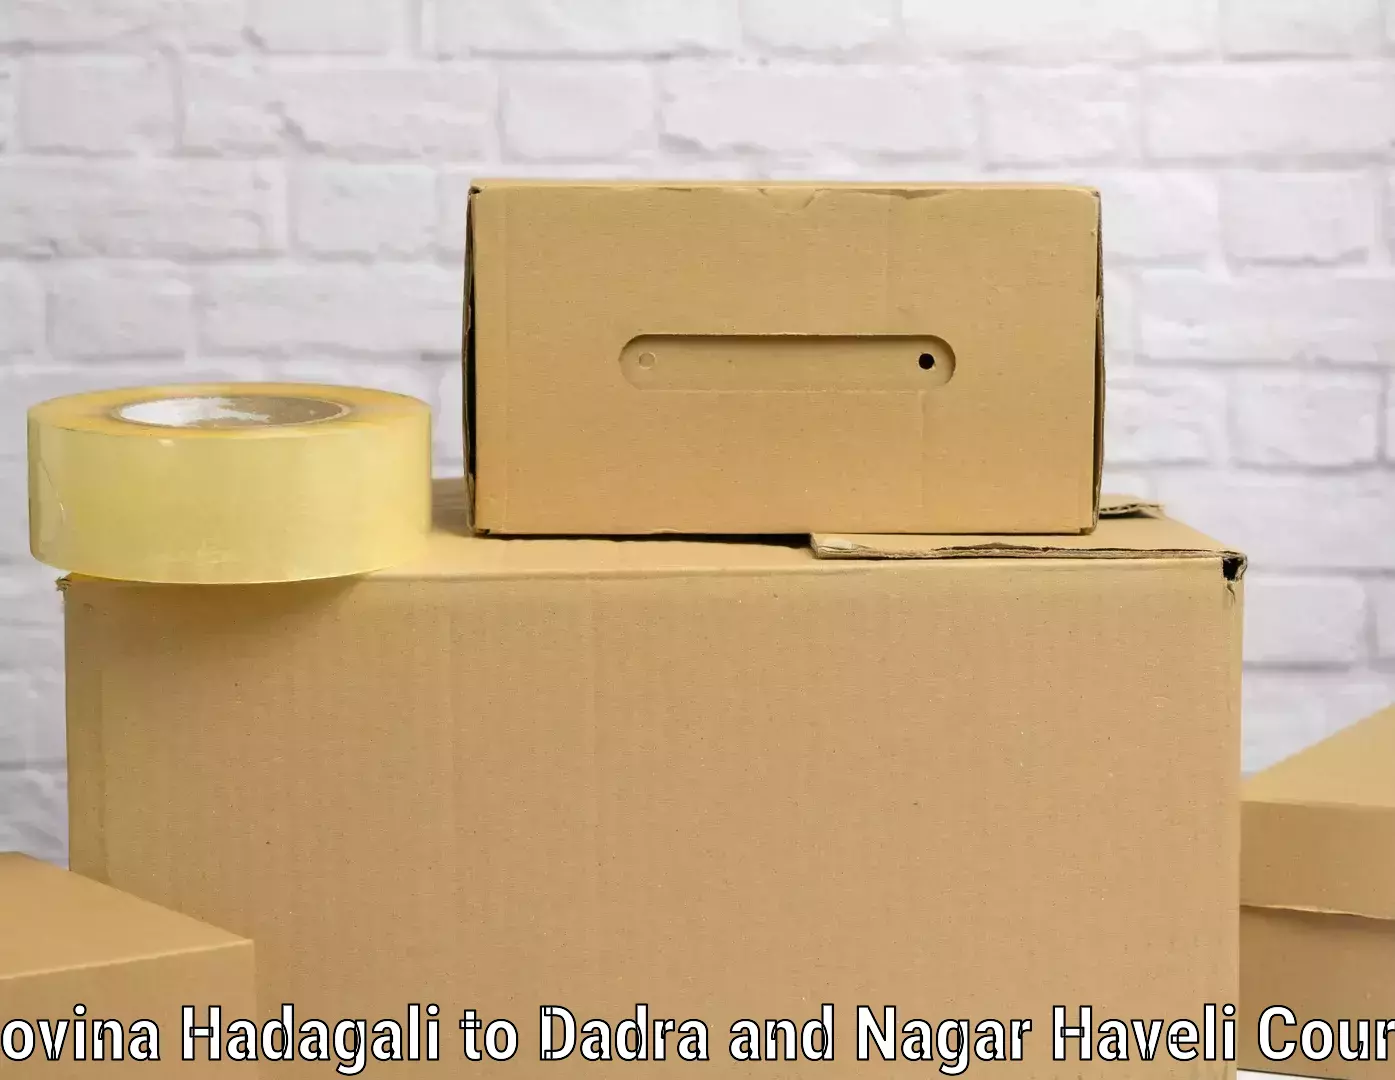 Reliable baggage delivery in Hoovina Hadagali to Dadra and Nagar Haveli